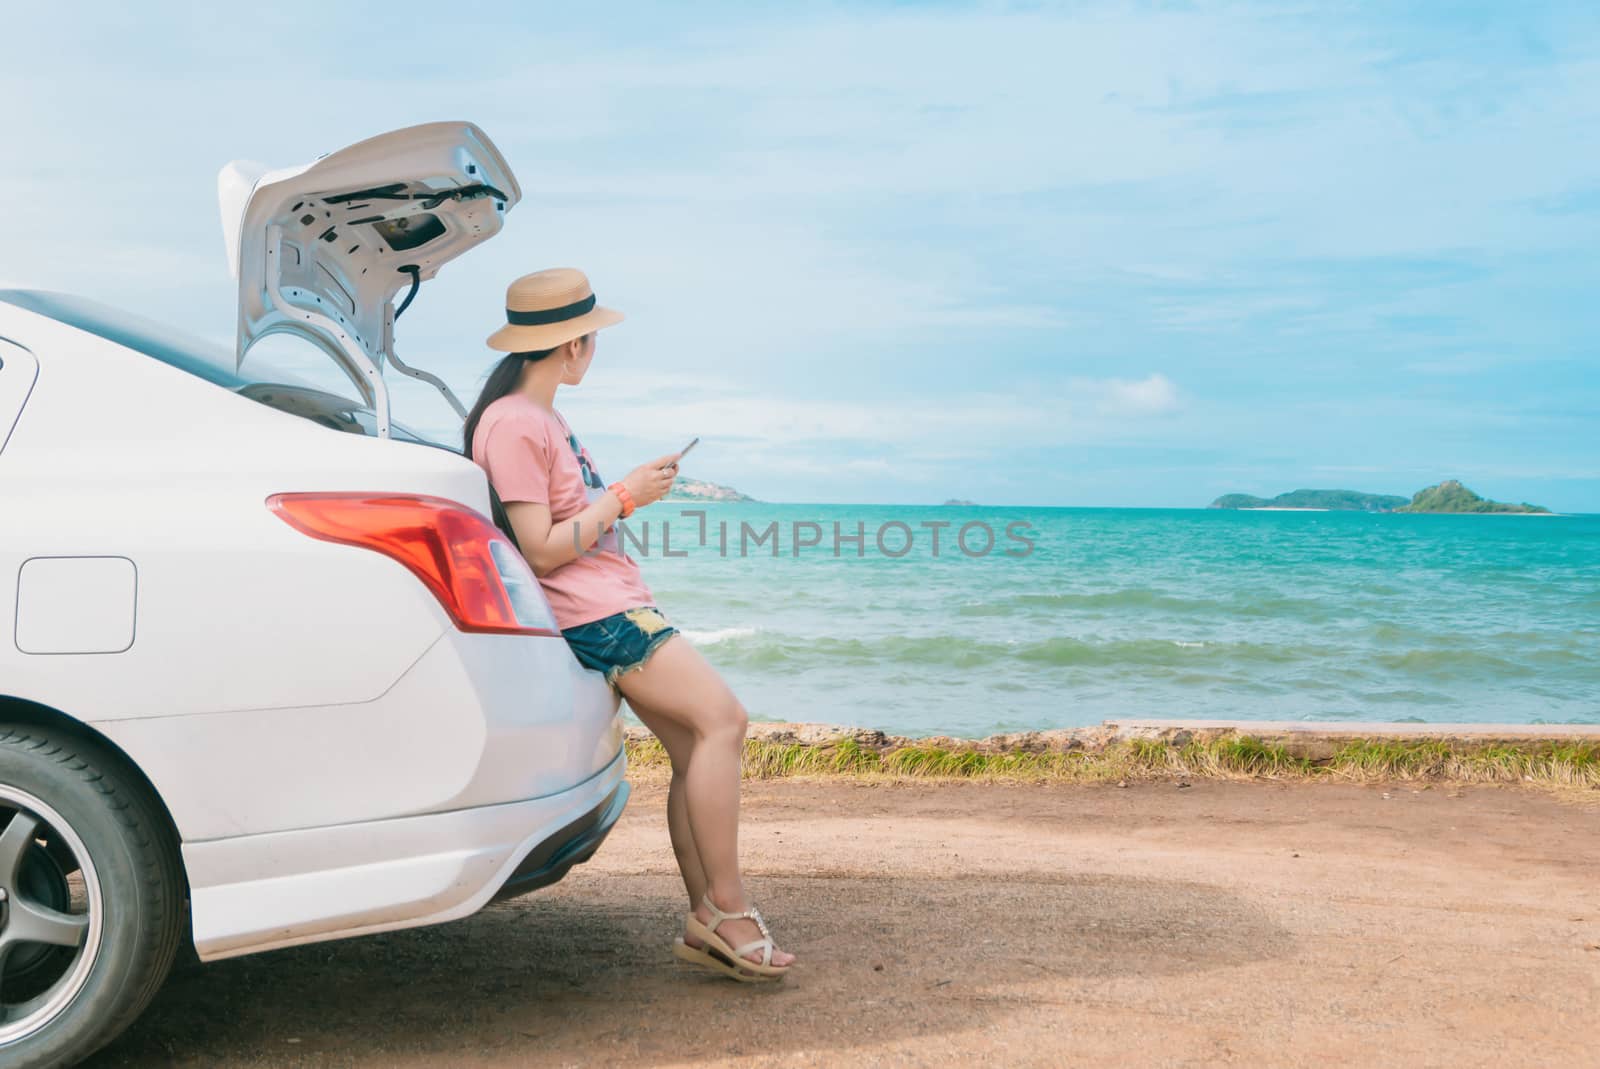 Women hold a smartphone sitting with a beach car by sompongtom